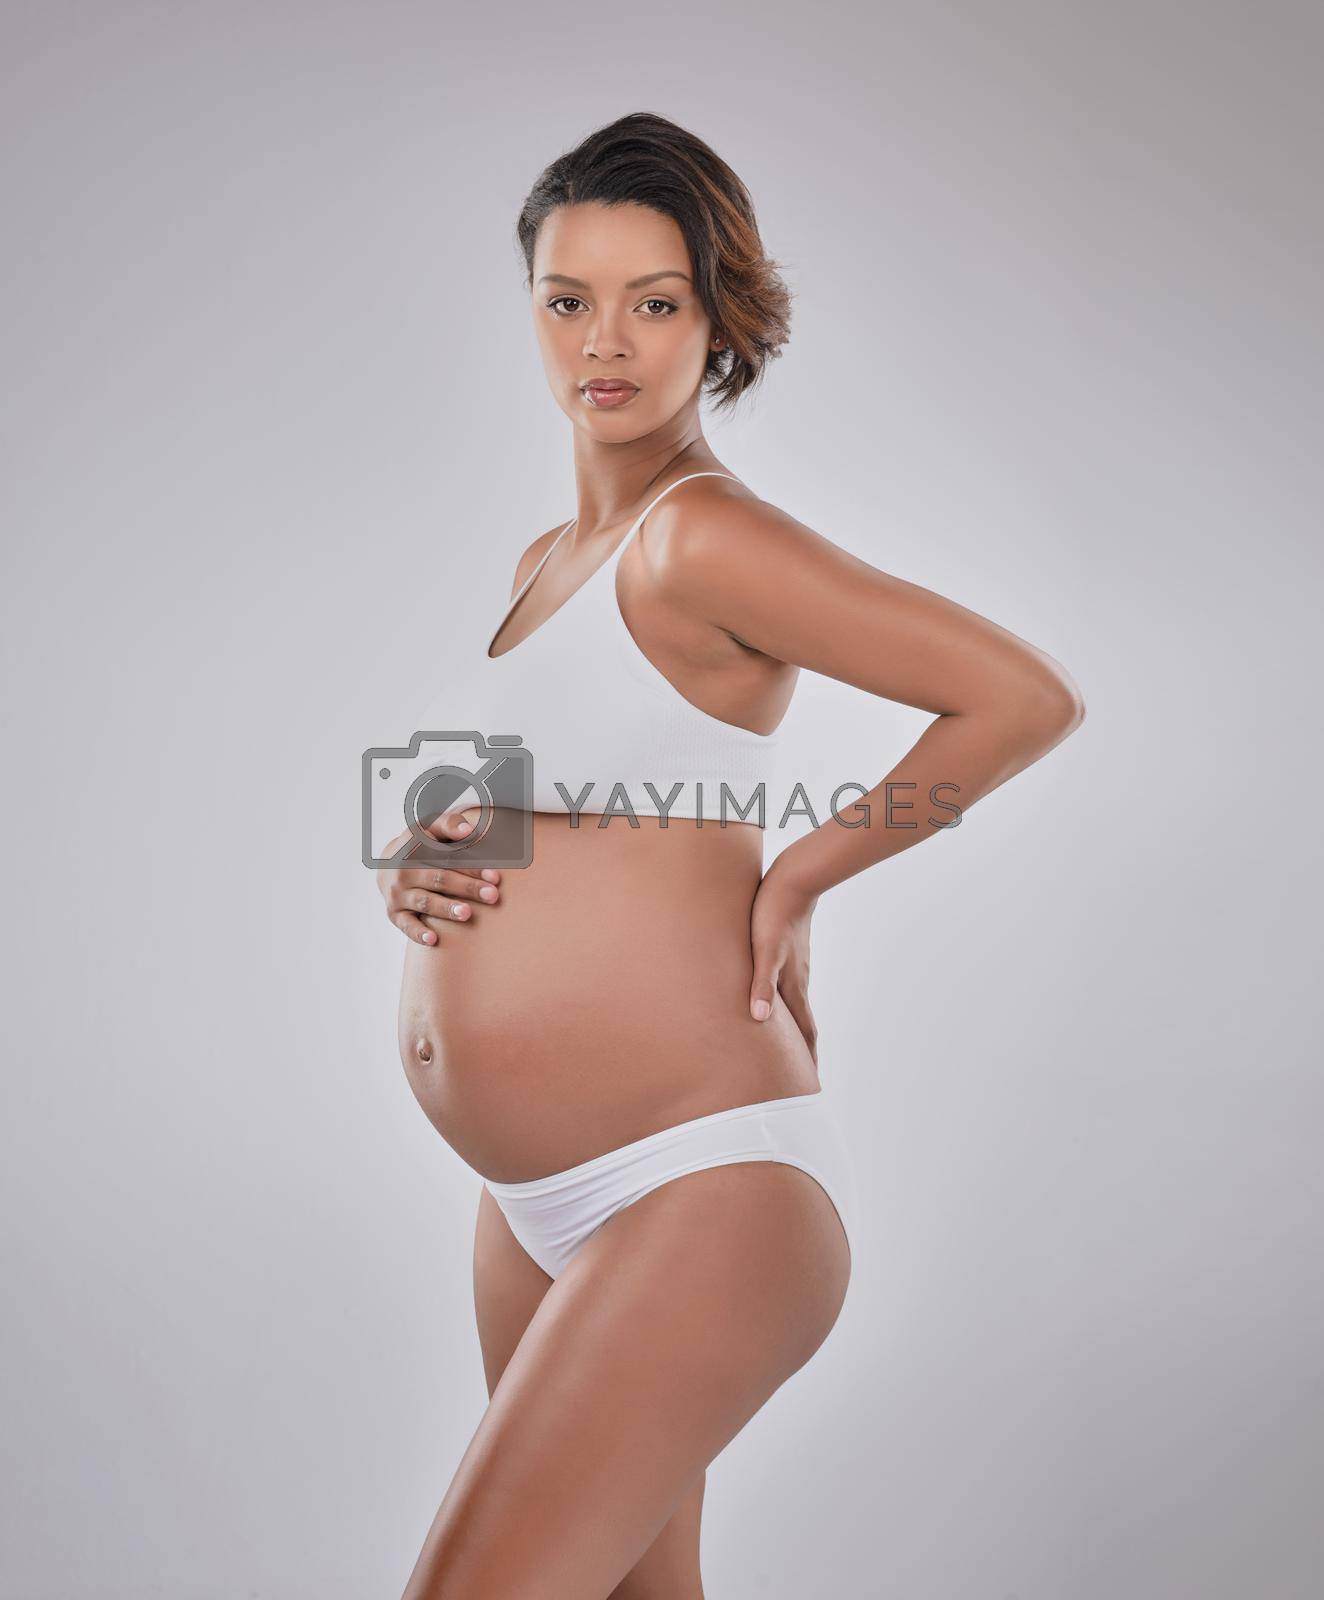 Studio portrait of a beautiful young pregnant woman posing against a gray background.